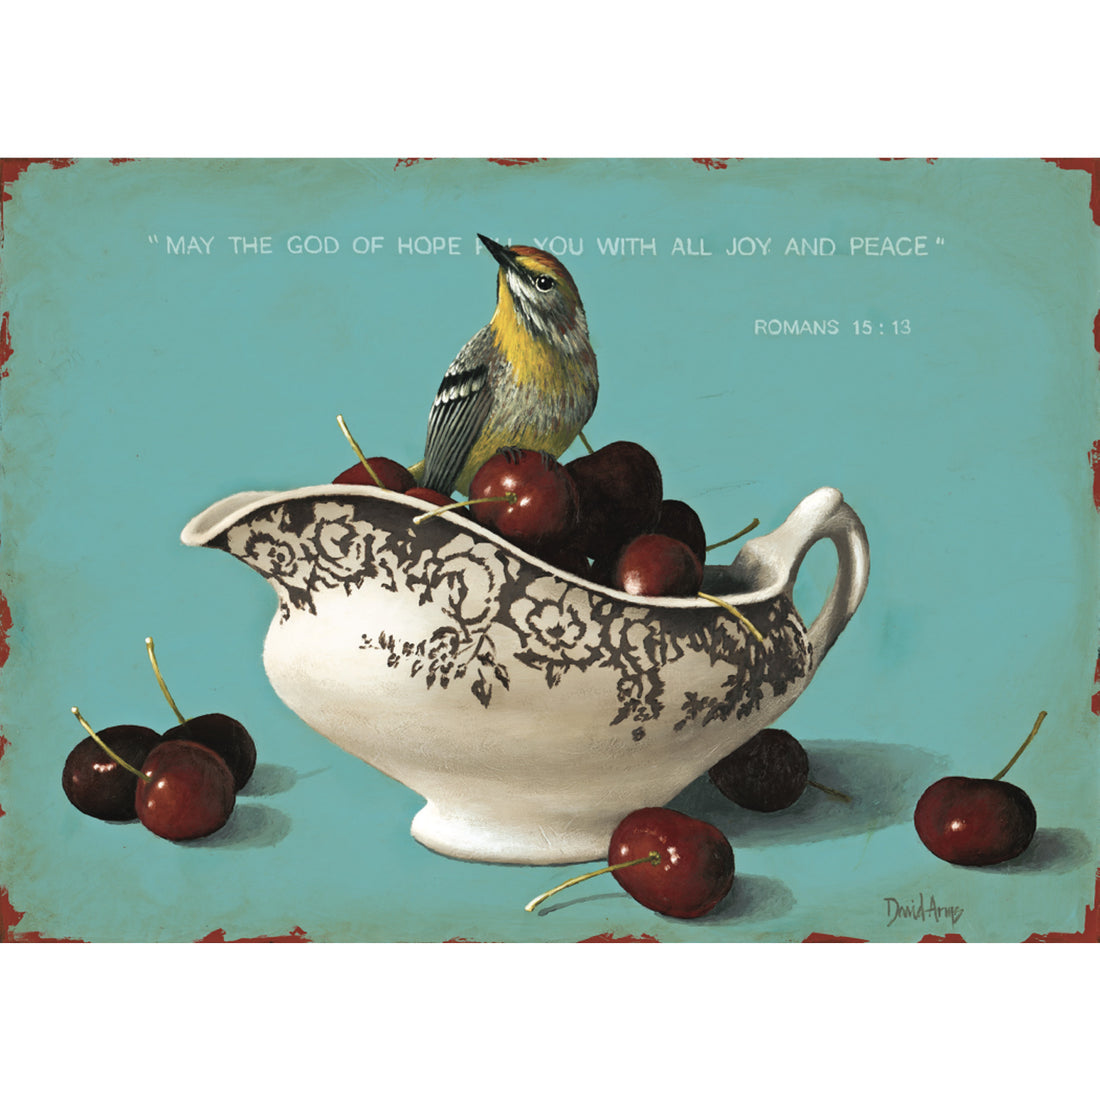 An illustration of a yellow and gray dong bird resting on the edge of an ornate dish full of deep red cherries on a teal background, with Bible quote &quot;Romans 15:13&quot; printed in white behind the bird.